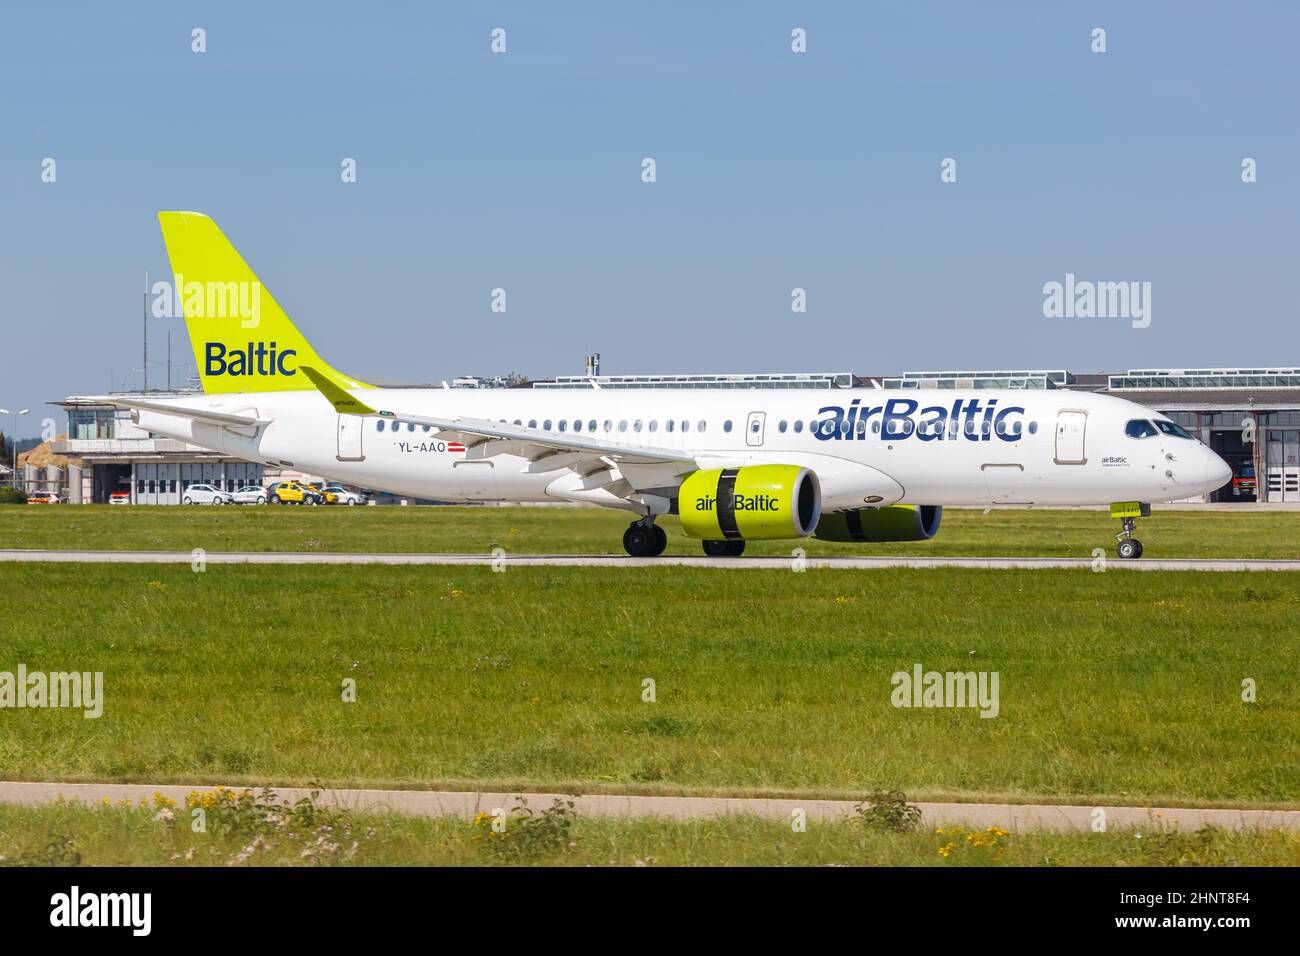 Air Baltic Airbus A220-300 airplane Stuttgart airport in Germany Stock Photo